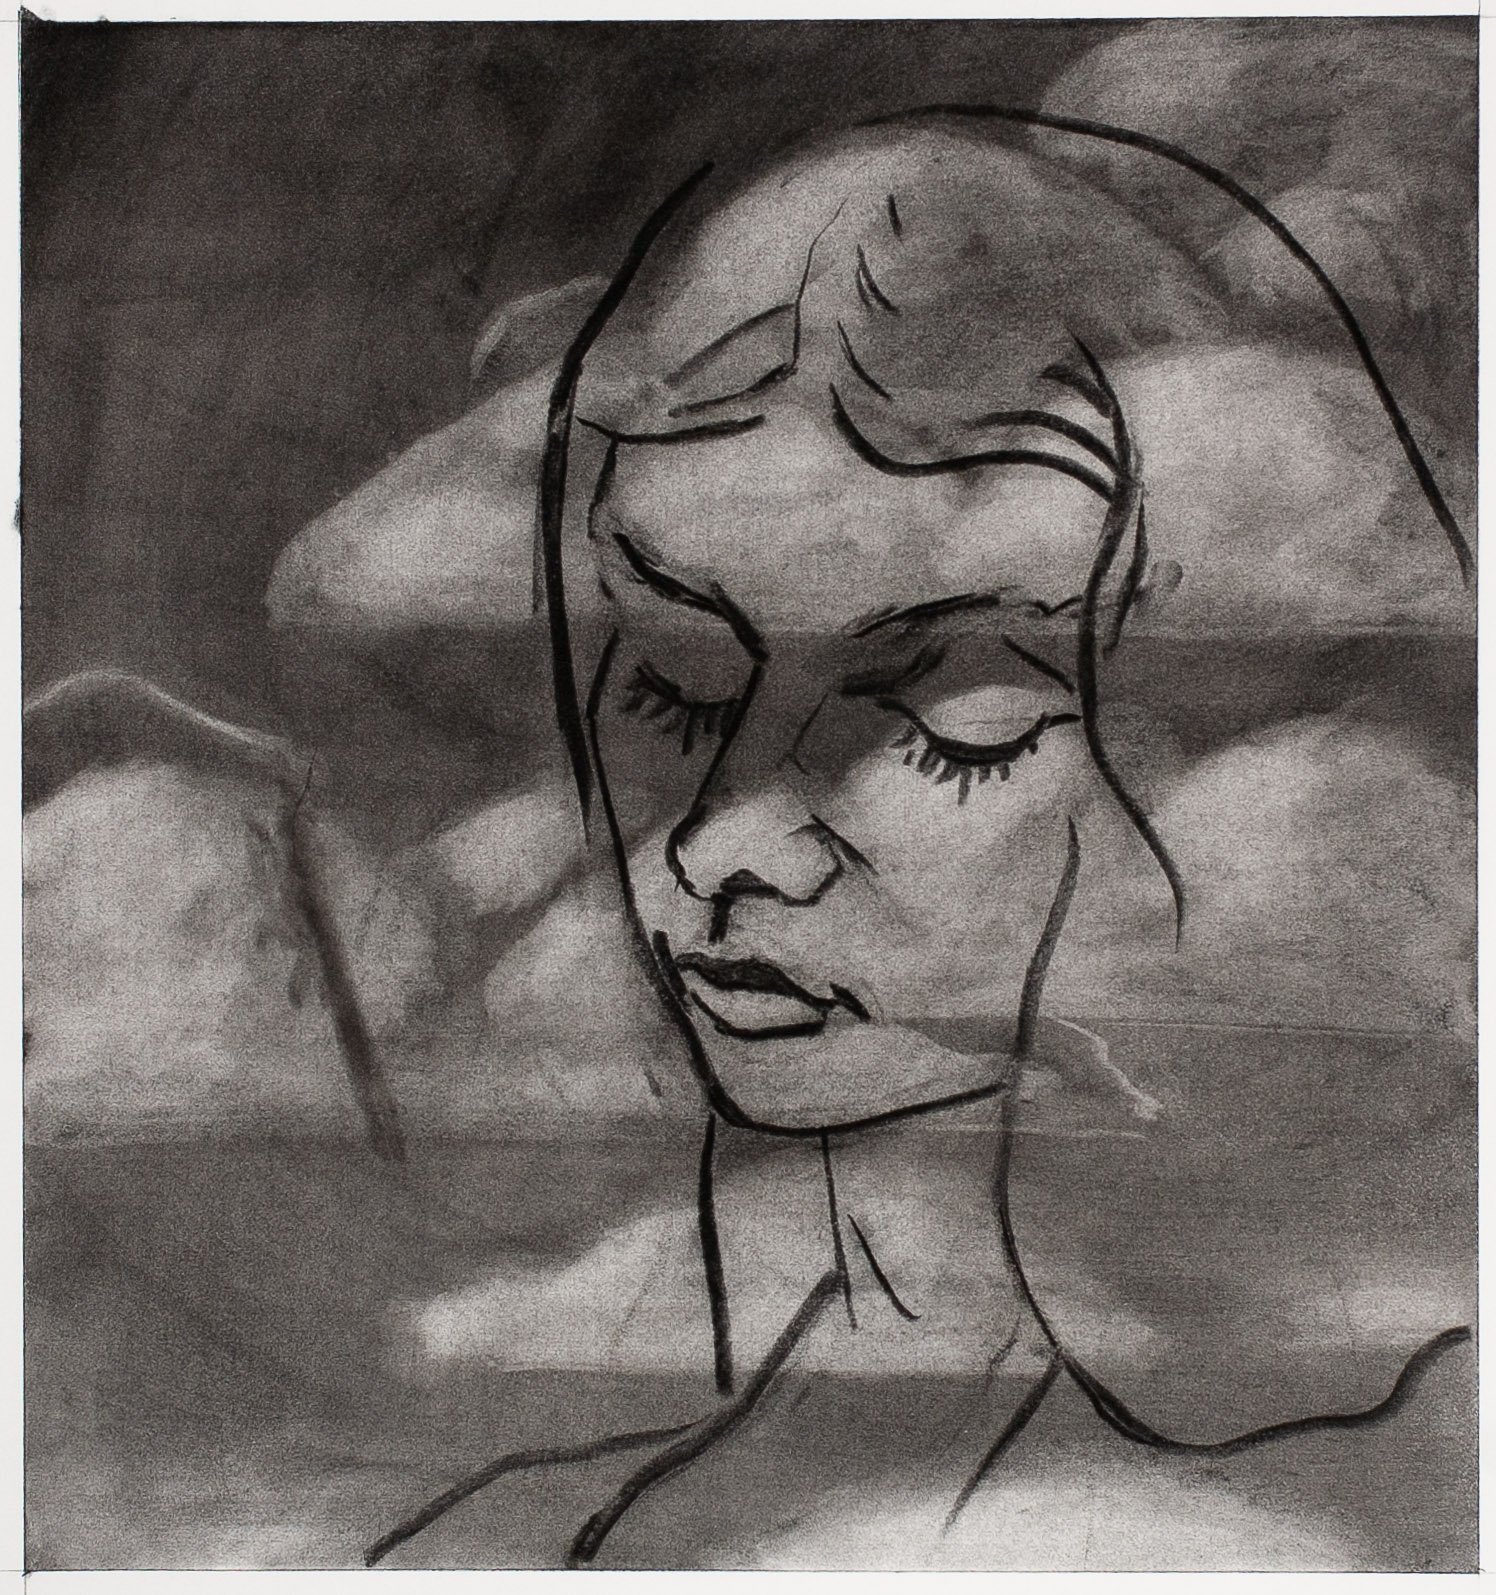   Grace   Powdered graphite and charcoal on paper  16 X 15 inches  2023 